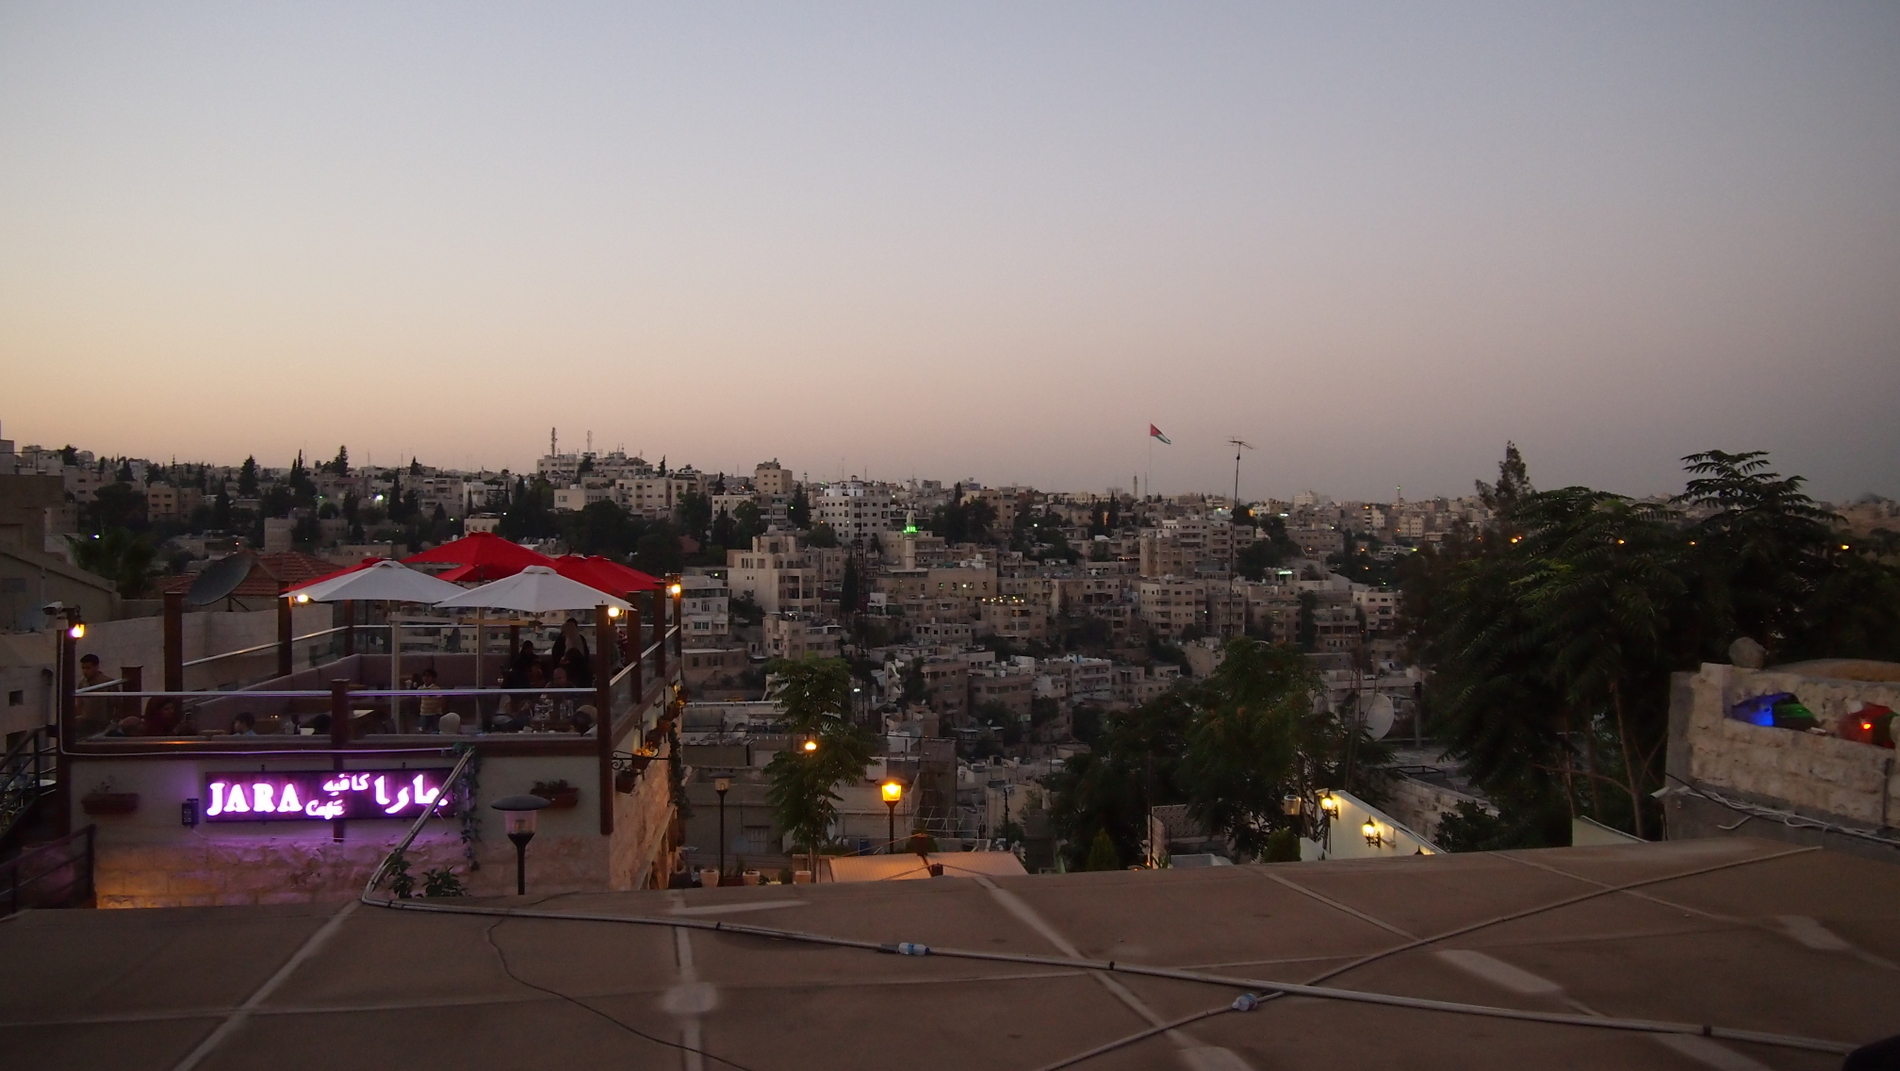 Rainbow Street in Amman is a popular location among locals